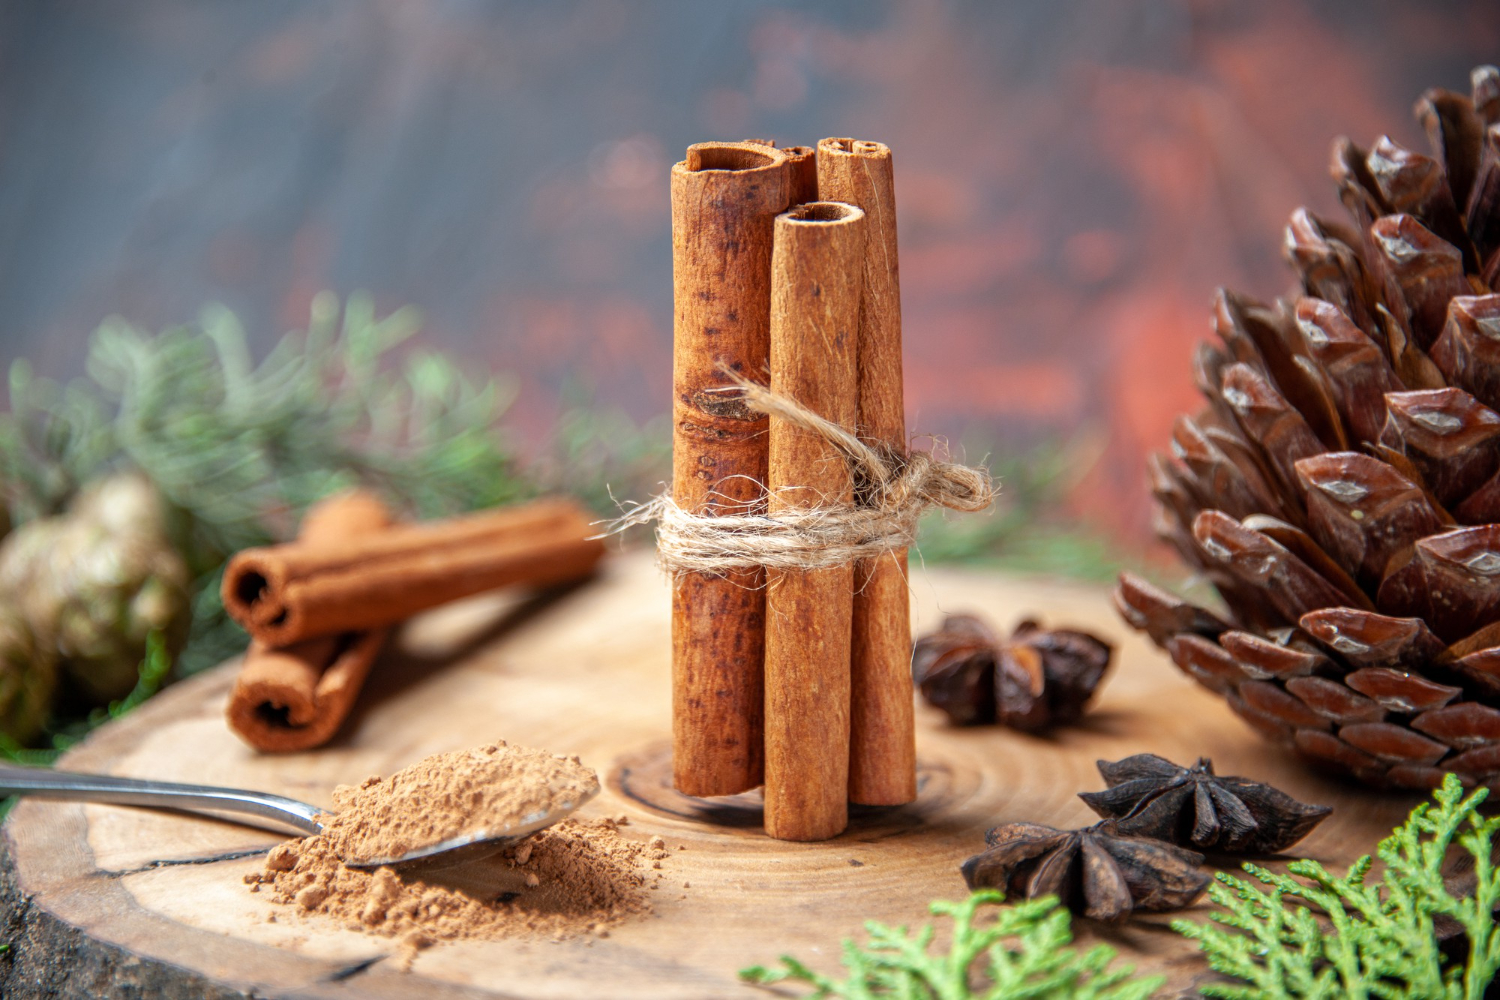 Cinnamon is healthy for dogs in moderate amounts.